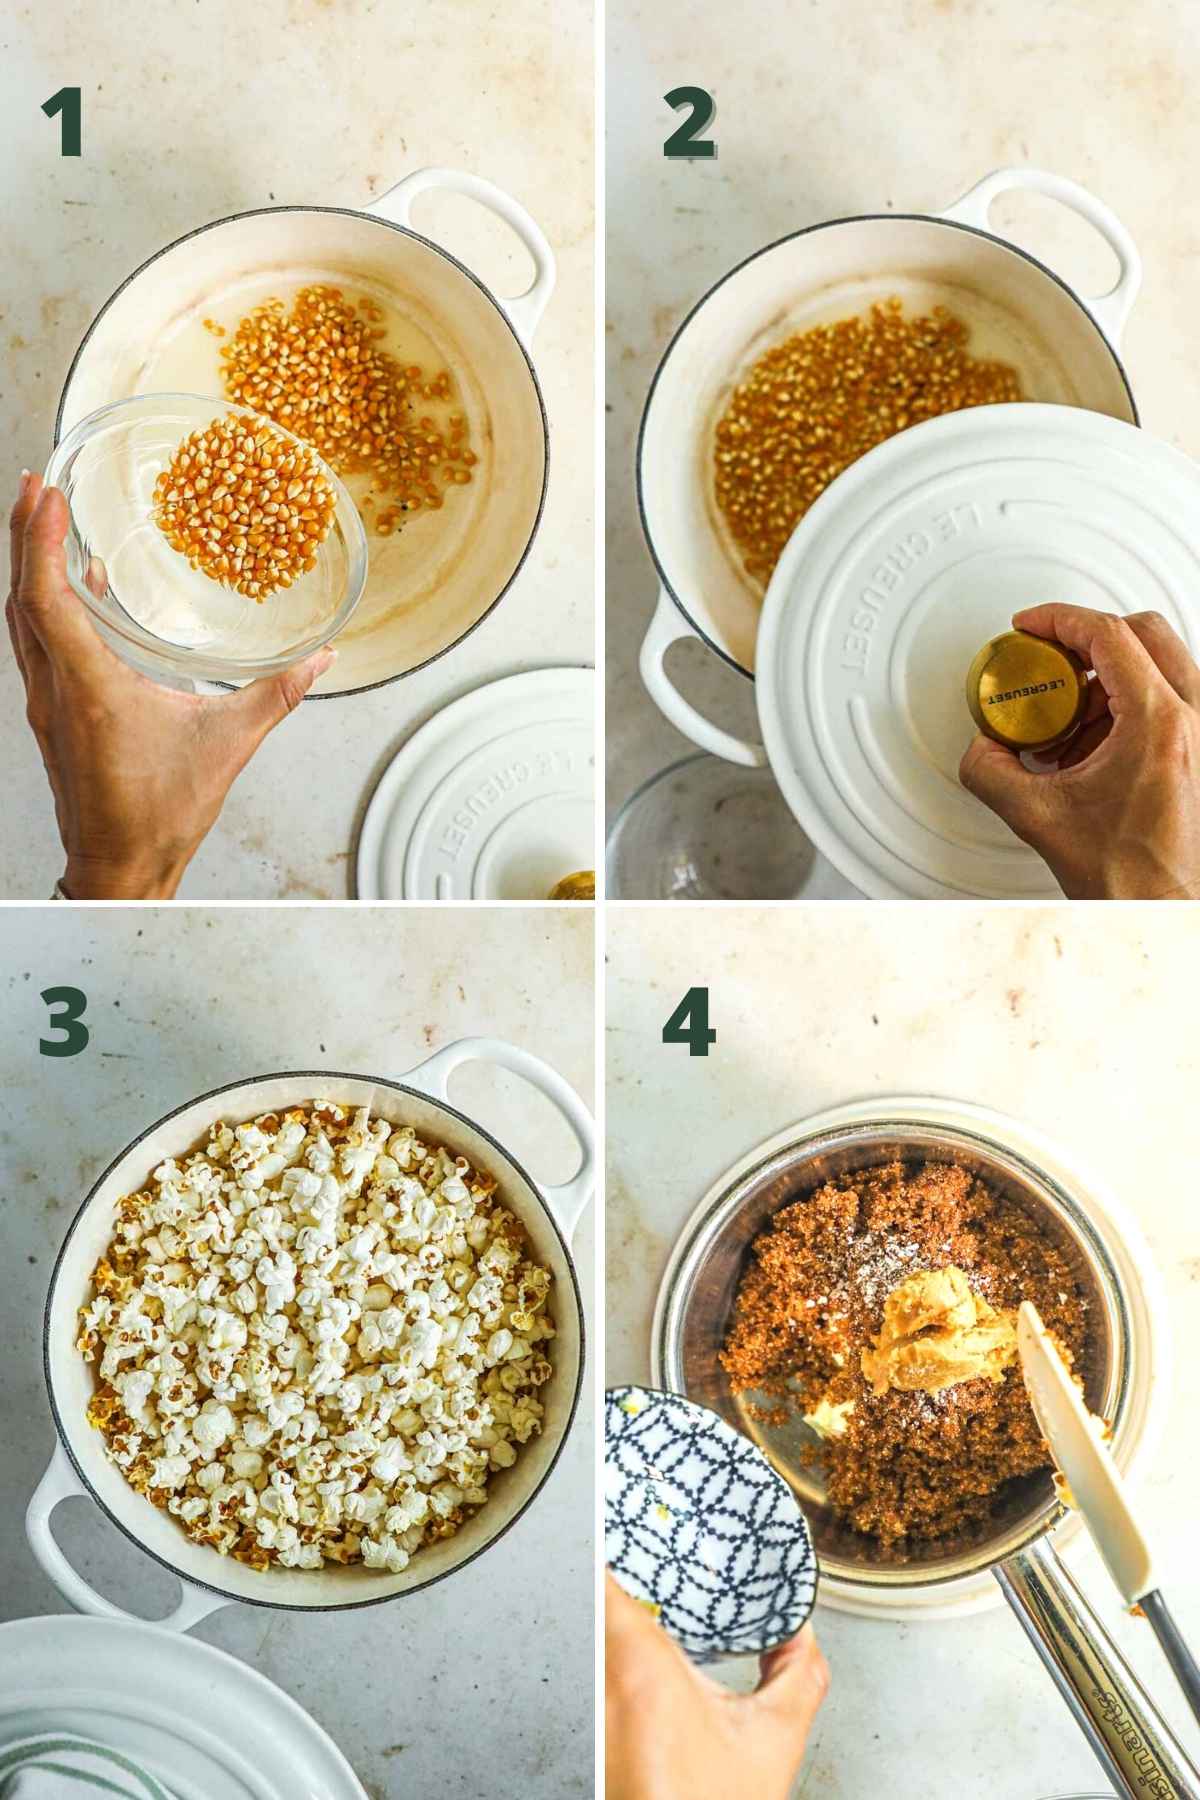 Steps to make miso caramel corn, including cooking the popcorn kernels in a pot and making the caramel coating.